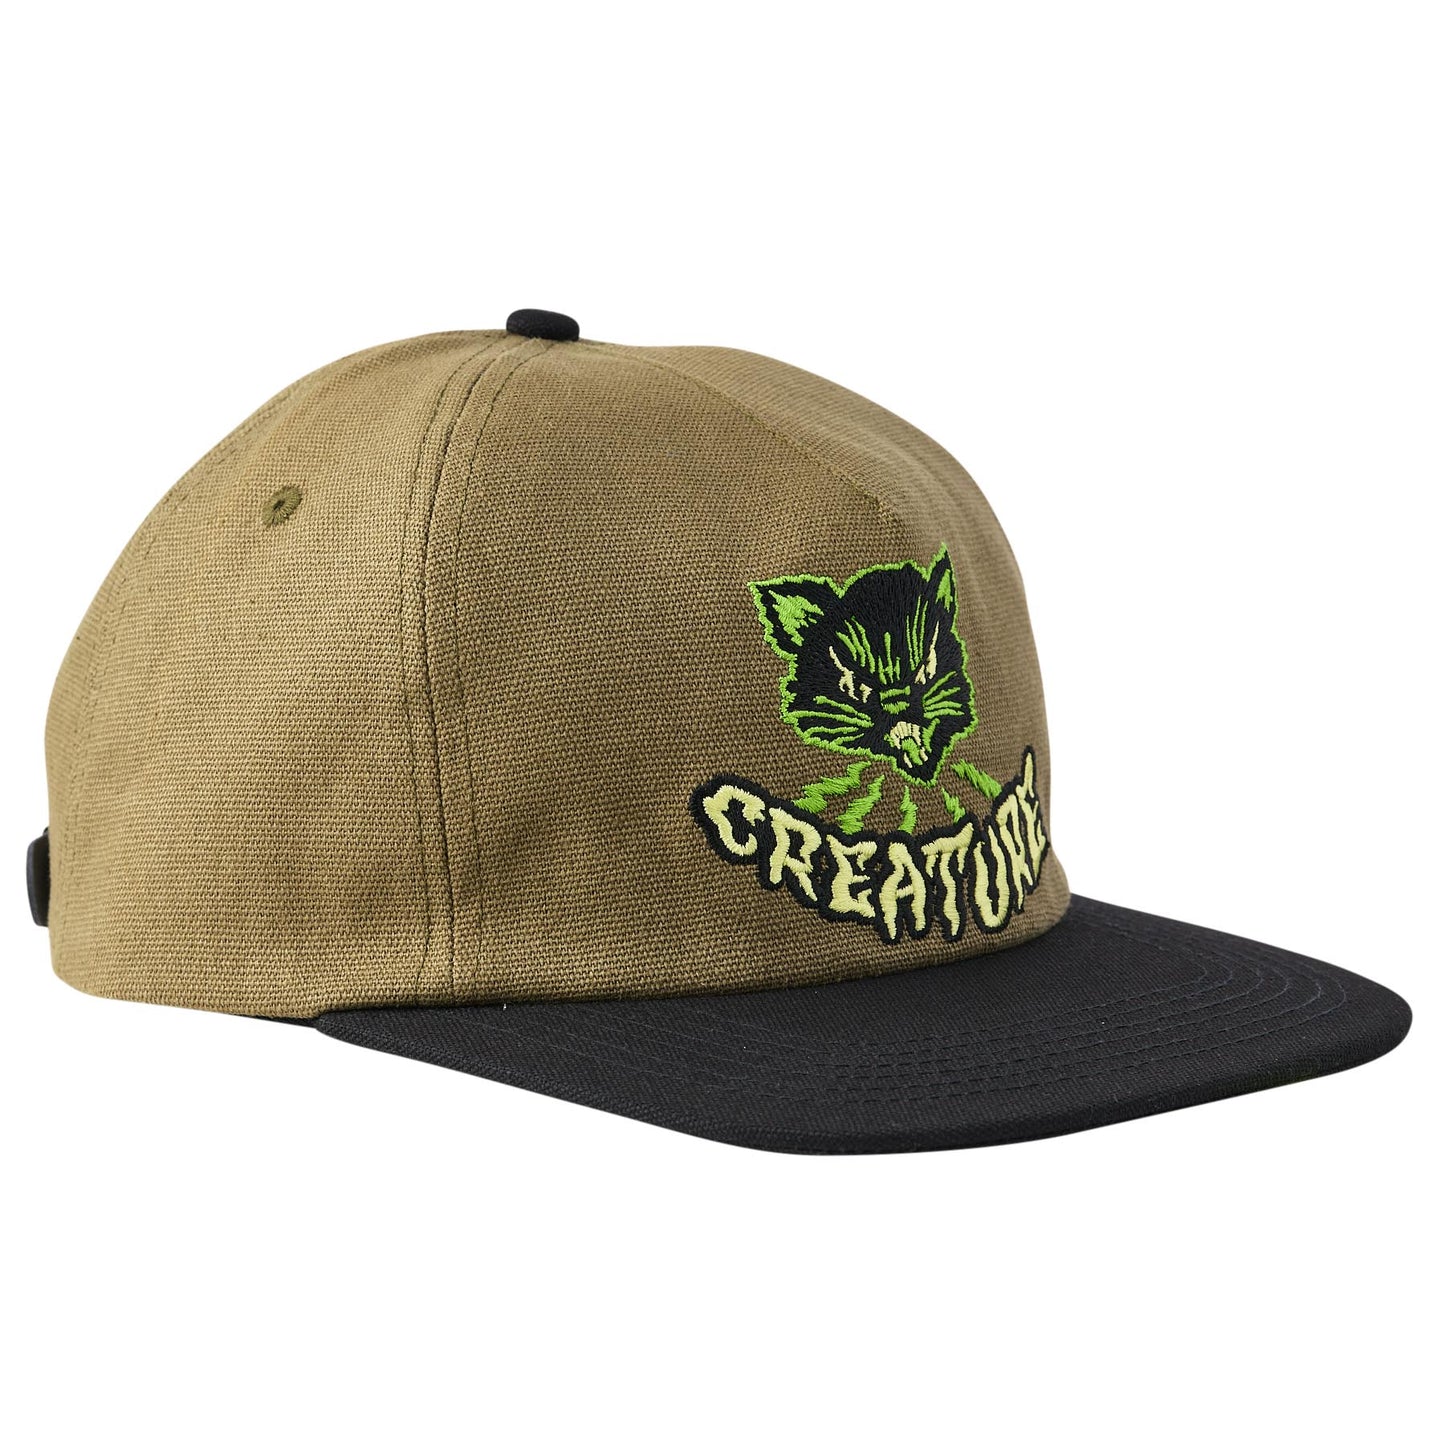 Creature - The Creeper Unstructured Hat